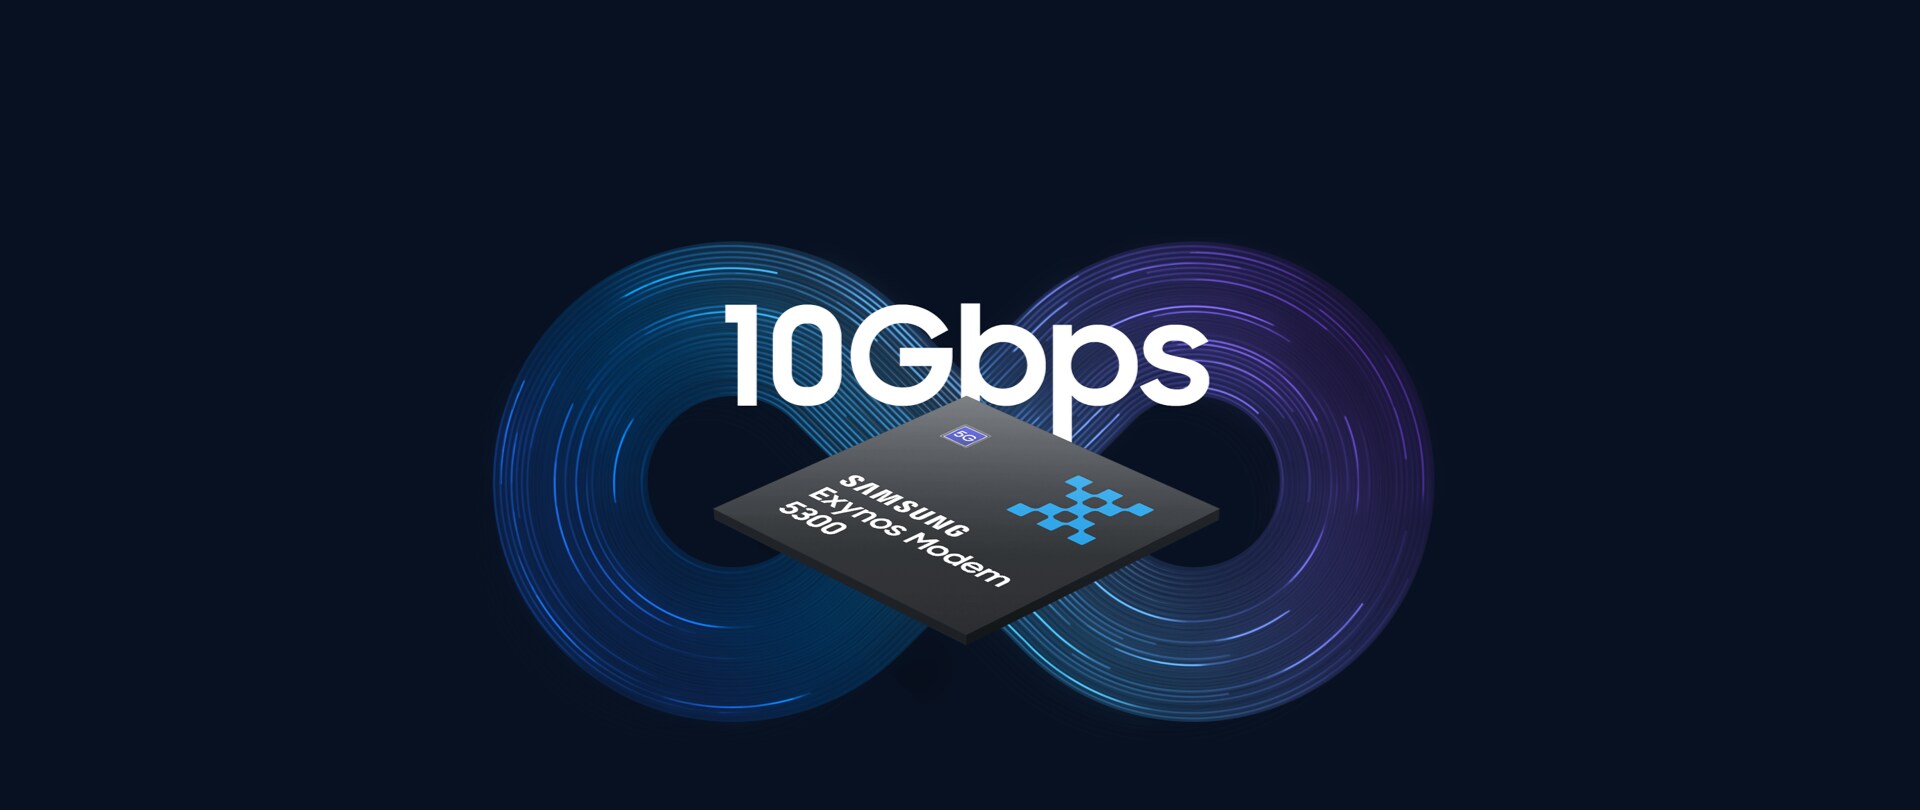 The Samsung Exynos Modem 5300 offers speeds of up to 10Gbps, utilizing FR1, FR2, and EN-DC technologies.